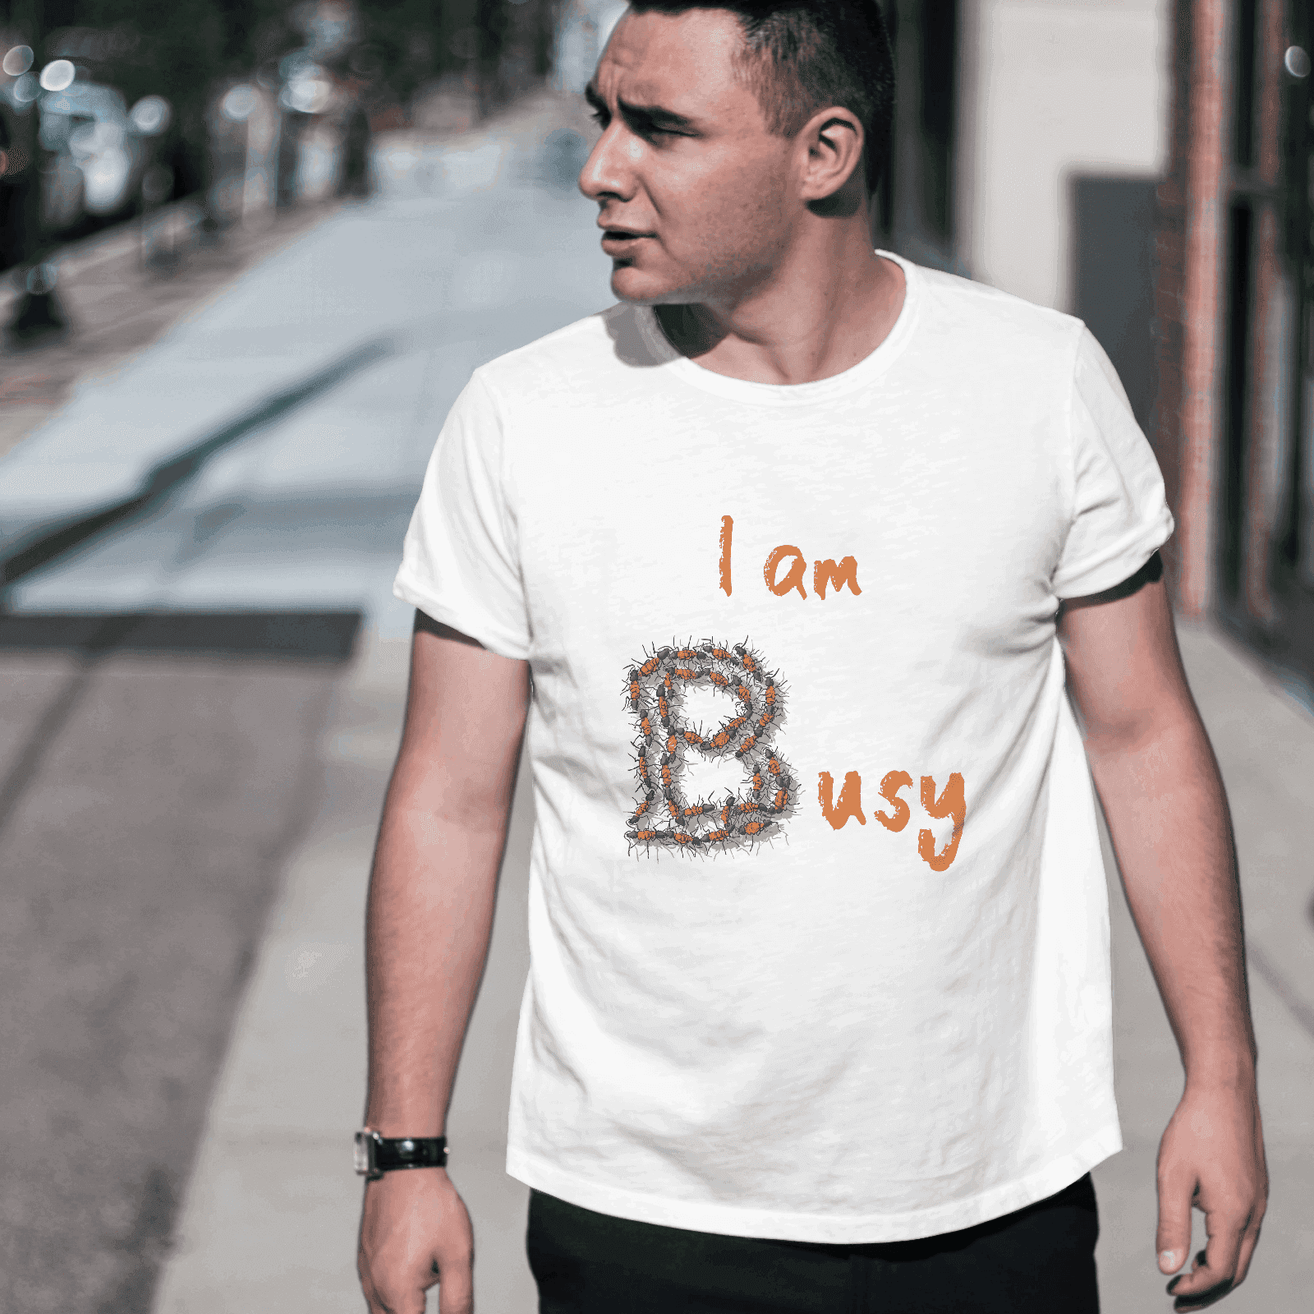 I am busy Men's Graphic T-Shirt - Busy Bee